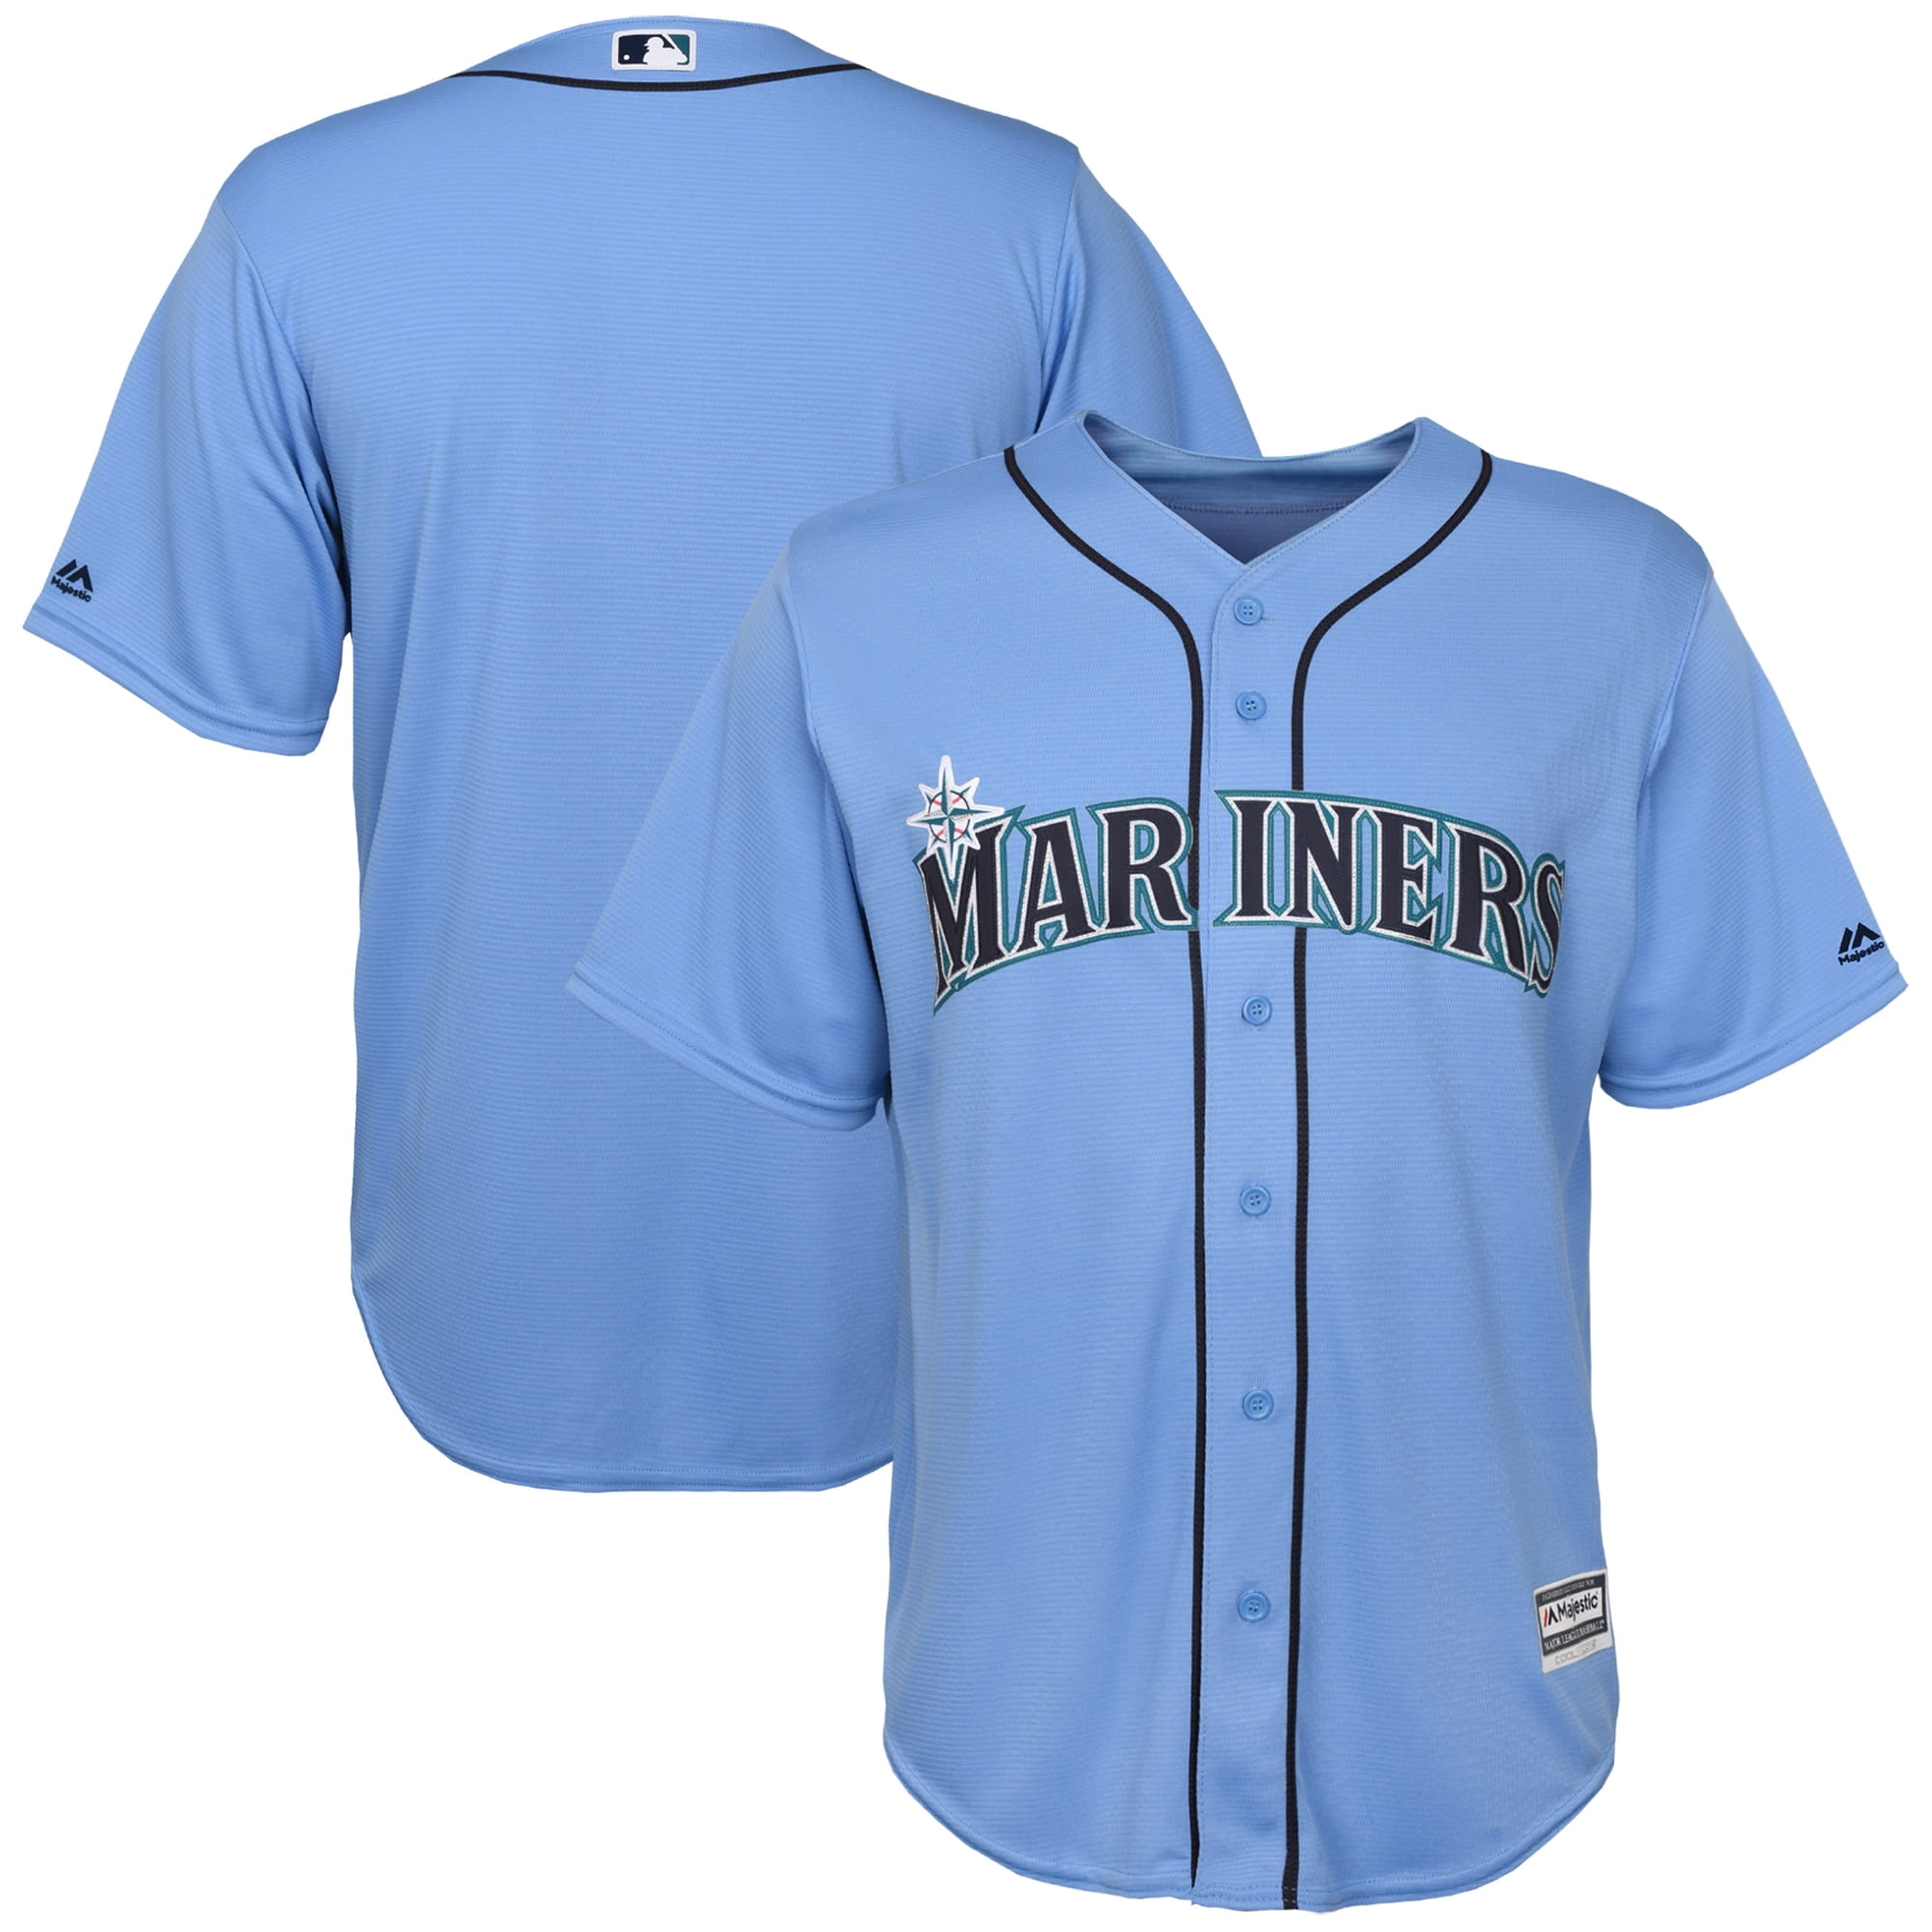 mariners baby blue jersey